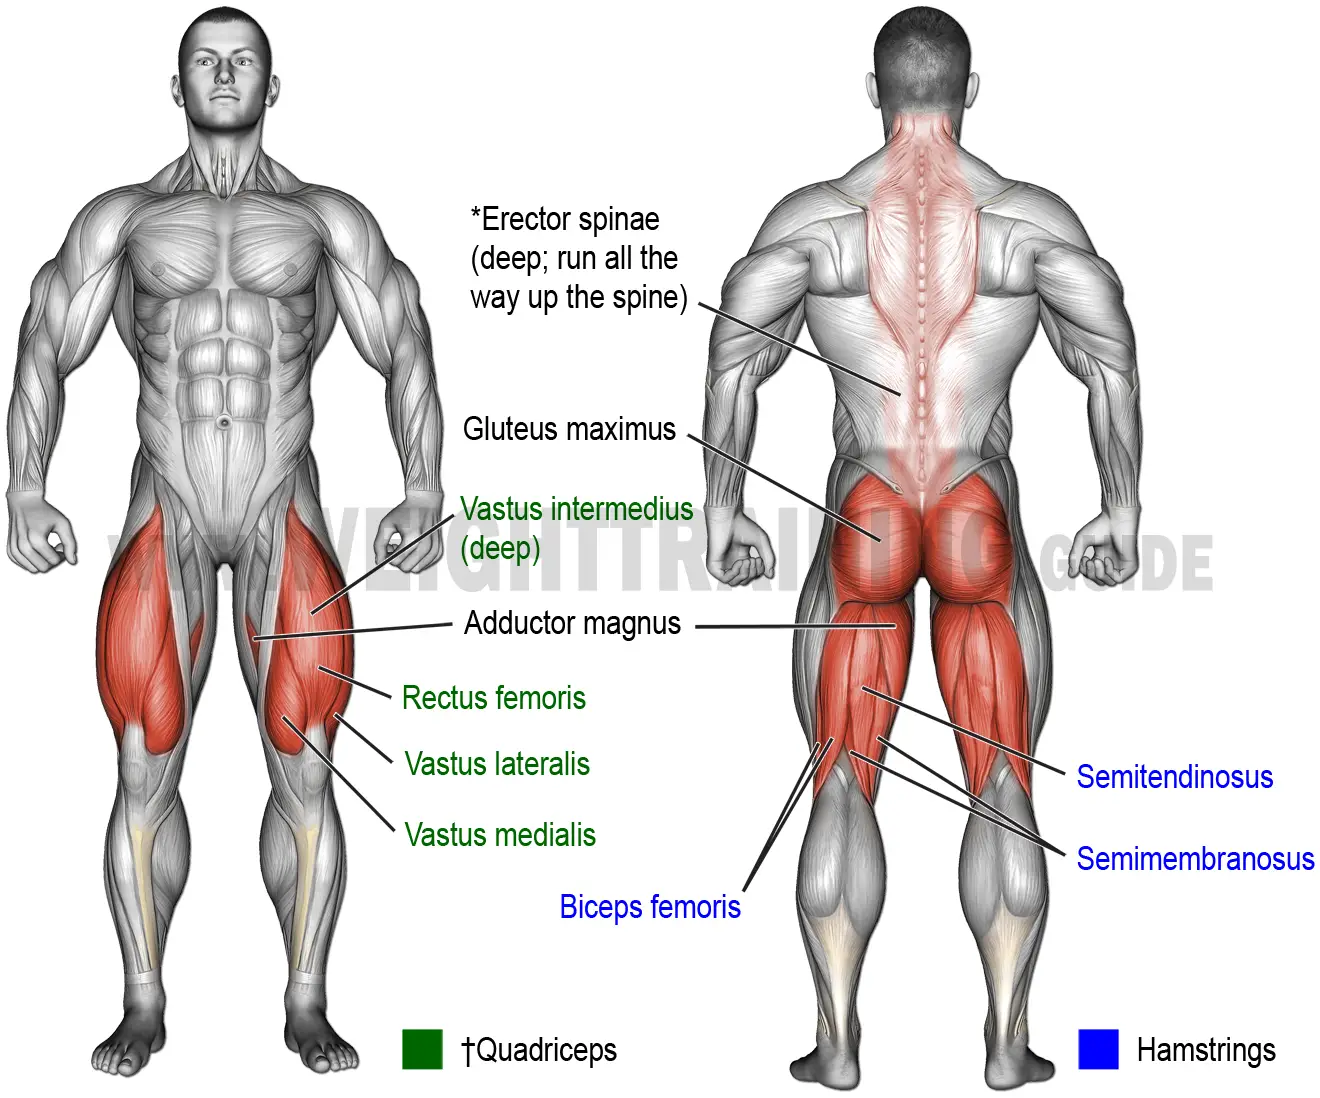 Muscles activated by hip-hinge exercises